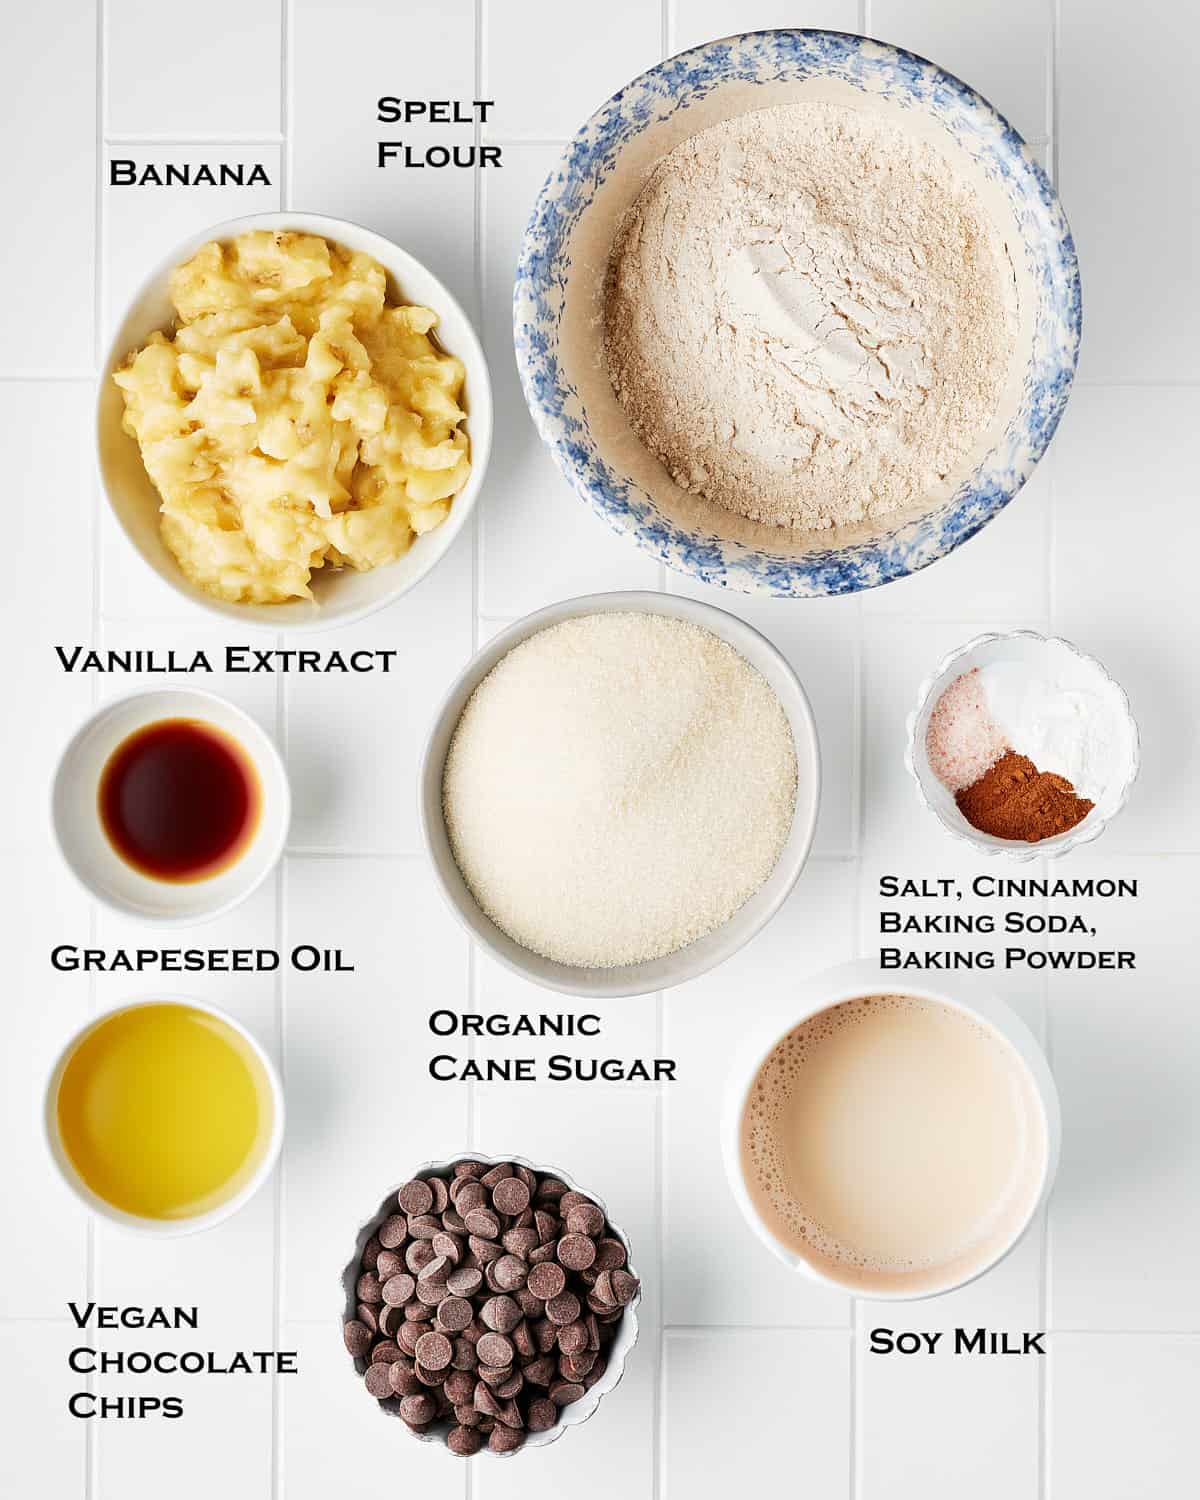 Overhead view of ingredients for vegan banana chocolate chip muffins ingredients.